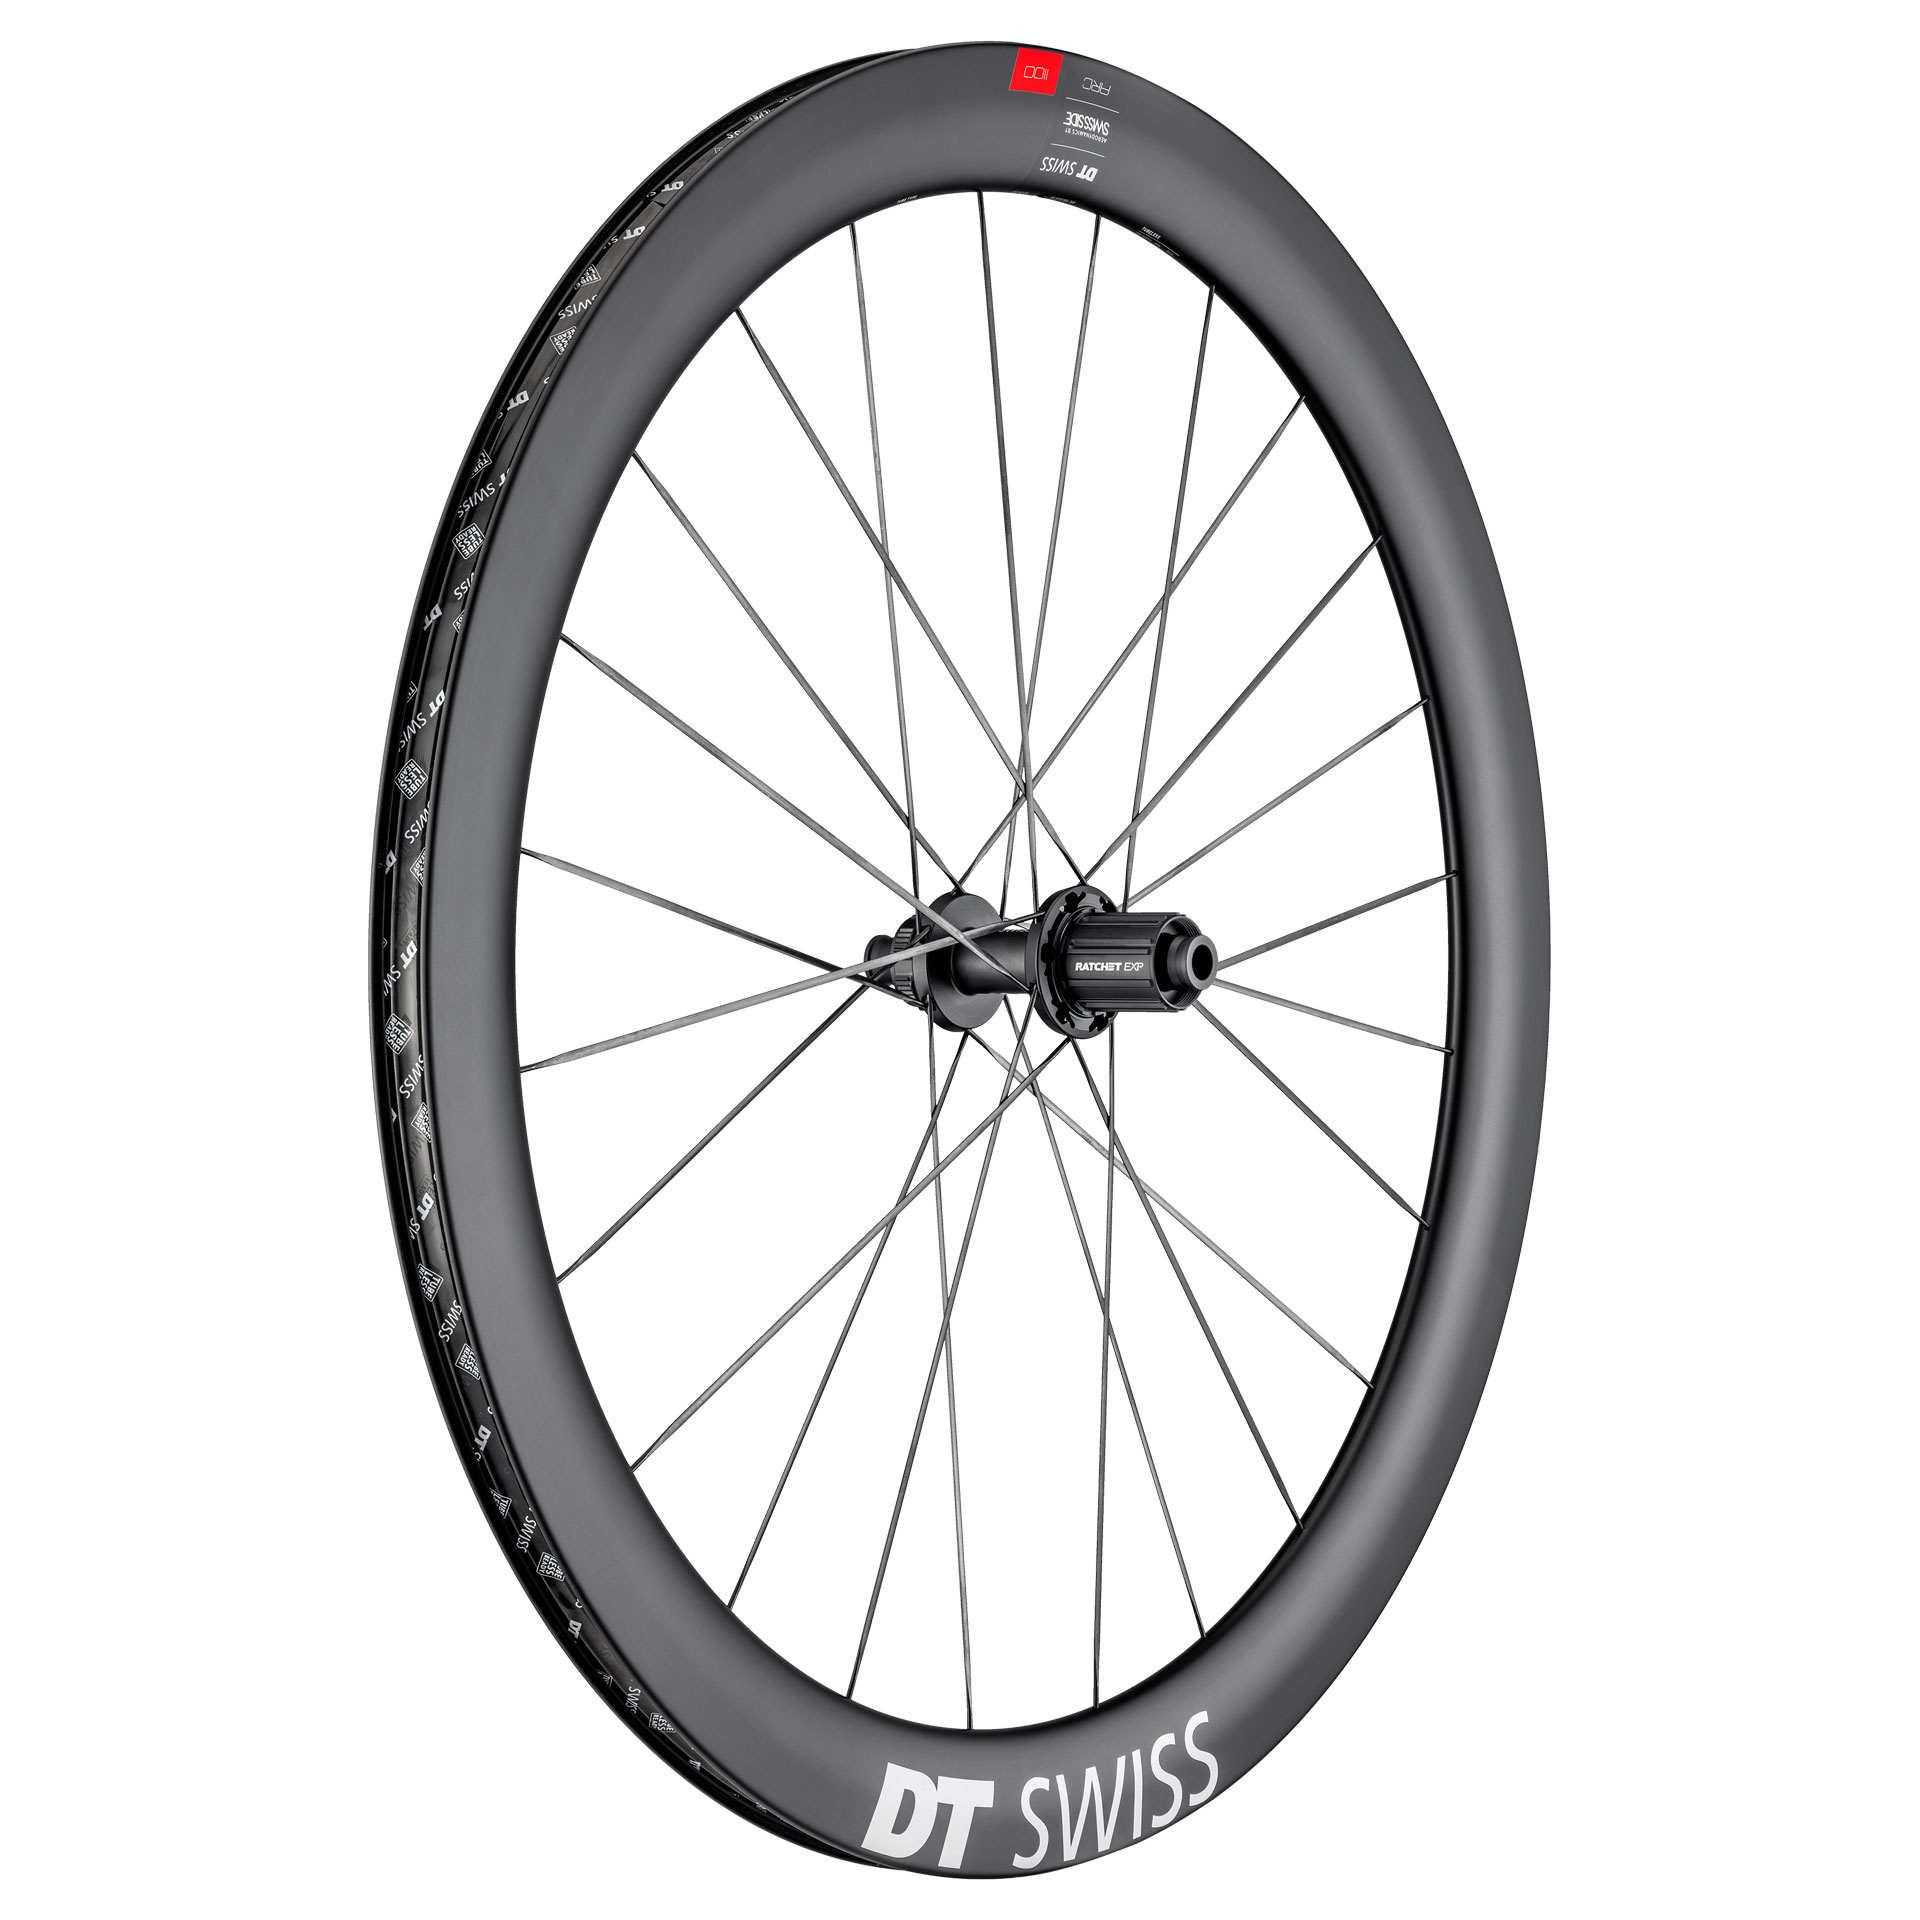 Dt Swiss ARC 1100 combined rim decal sets for two wheels rim depth 60/50mm